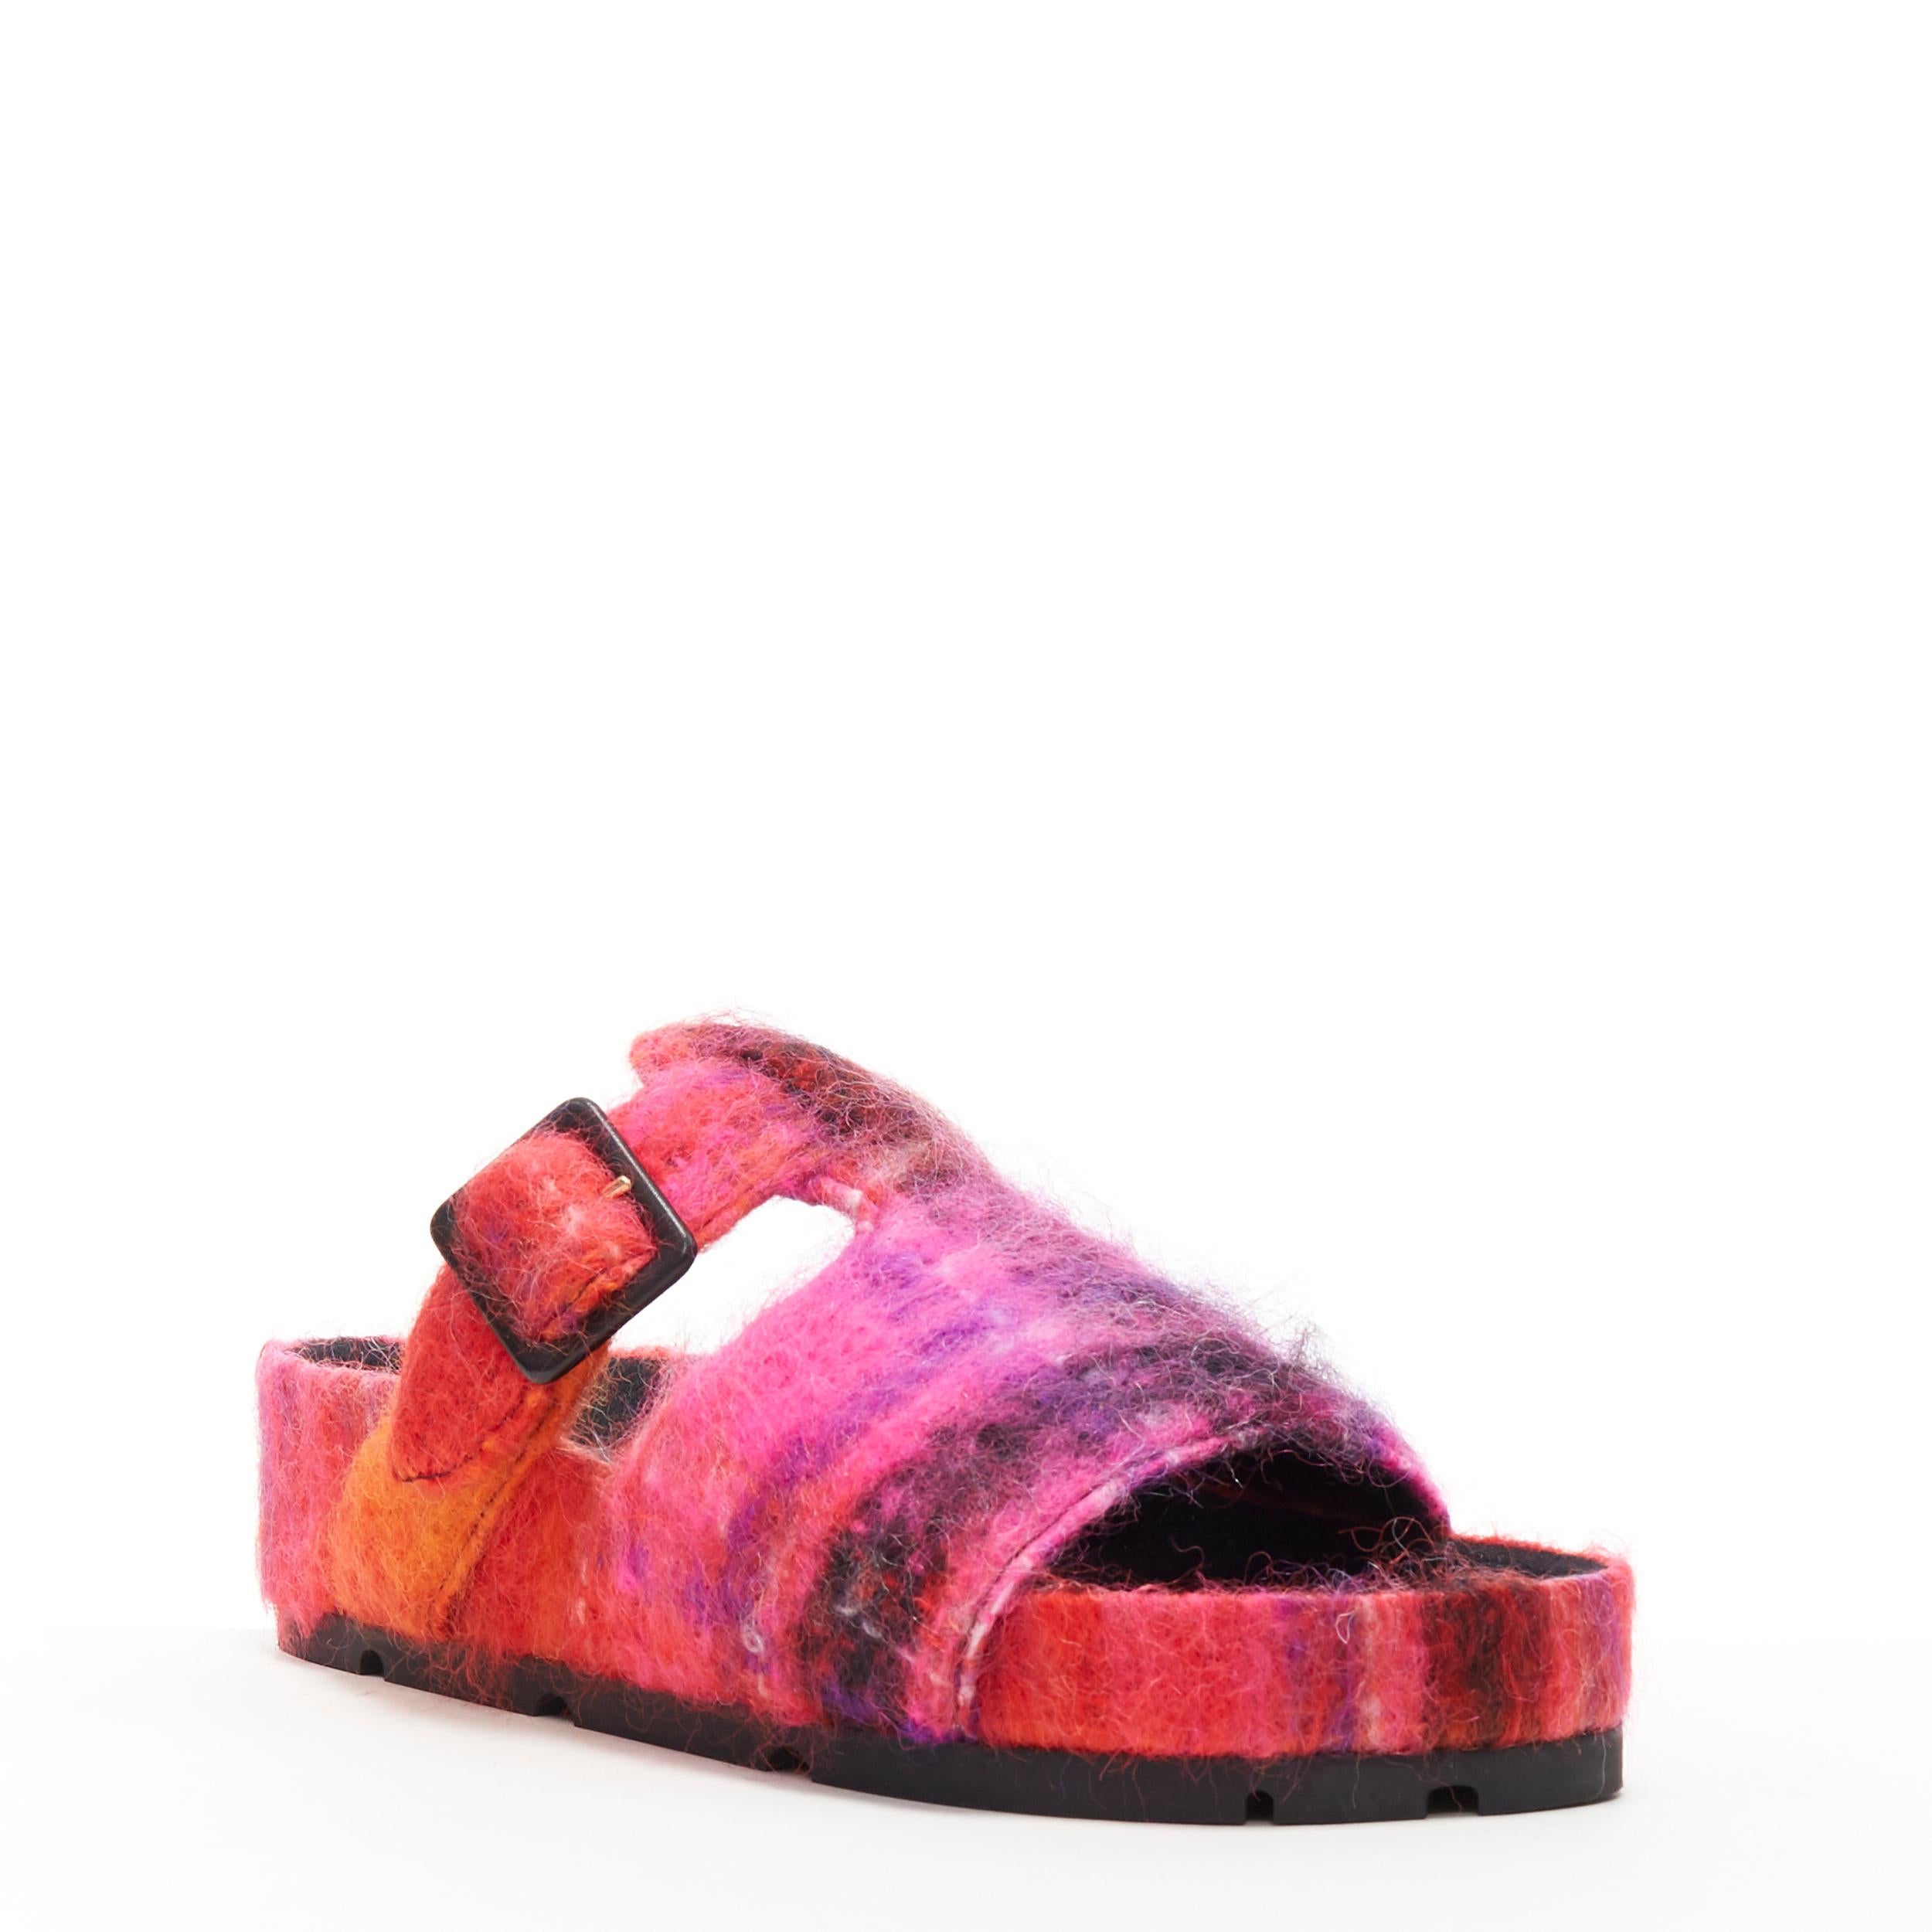 new OLD CELINE Boxy Mohair pink red check print buckle flat sandal slides EU40
Brand: Celine
Designer: Phoebe Philo
Model Name / Style: Boxy Mohair
Material: Mohair
Color: Red
Pattern: Check
Closure: Buckle
Extra Detail: Flat (Under 1 in) heel